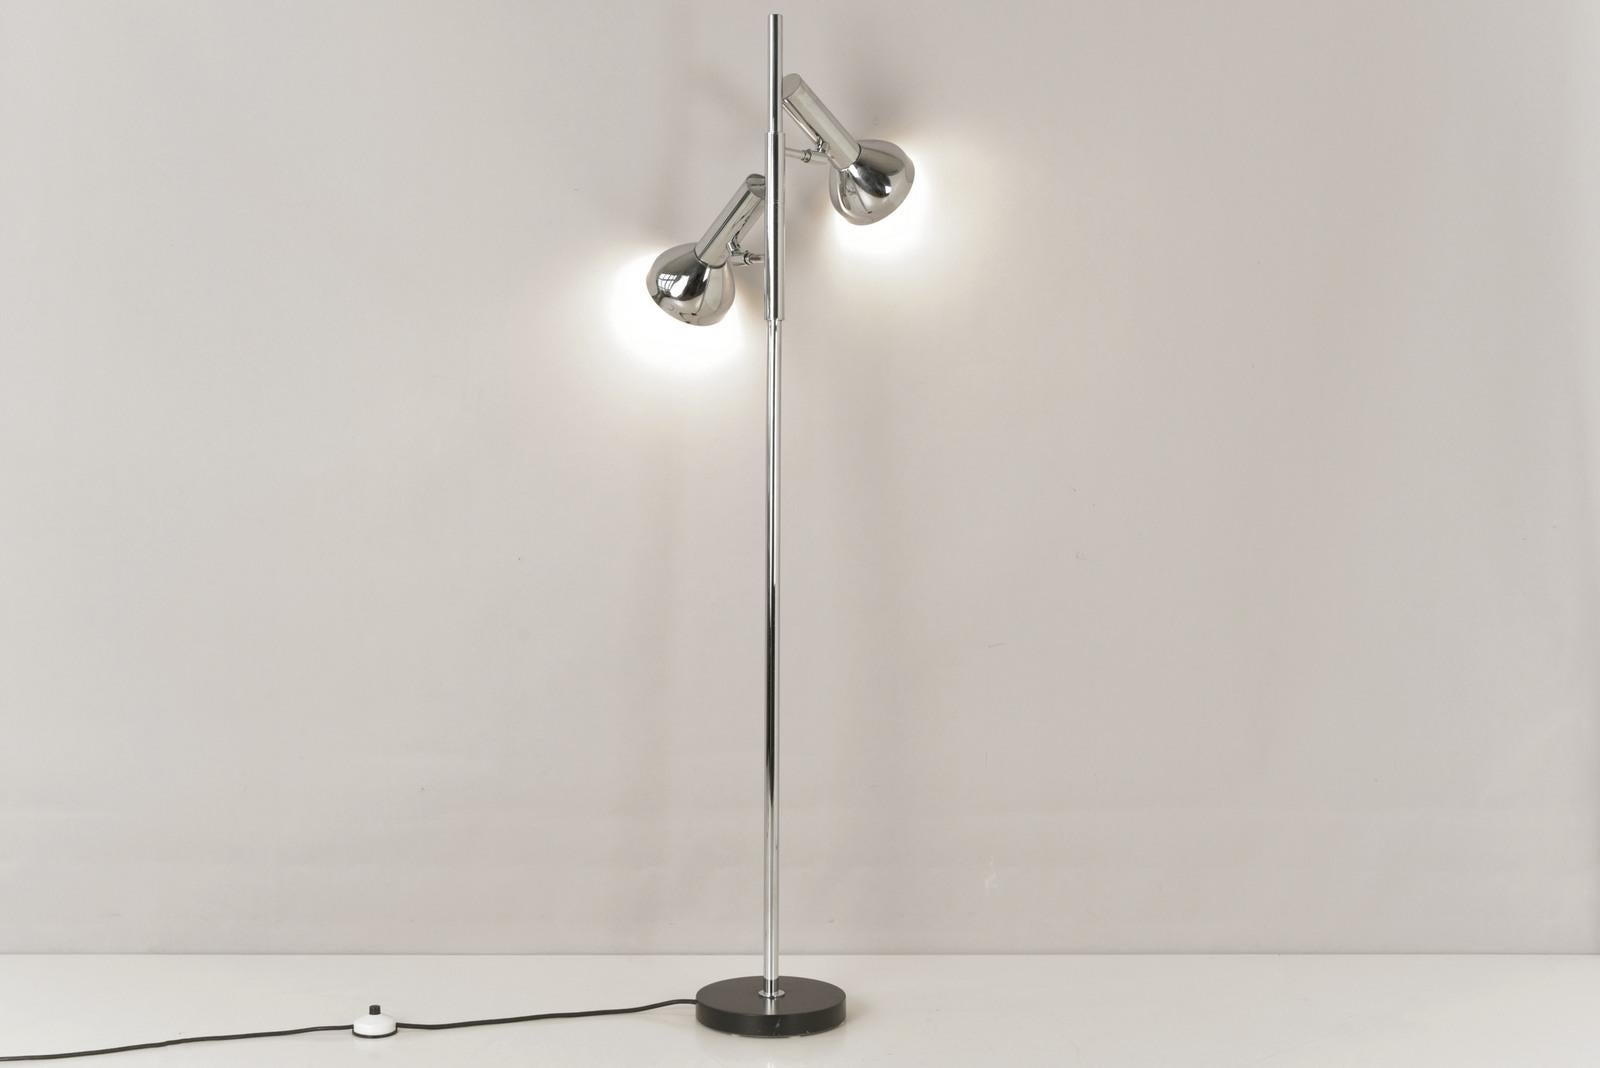 Late 20th Century Floor Lamp in Chrome by Gebrüder Cosack, Germany - 1970s  For Sale